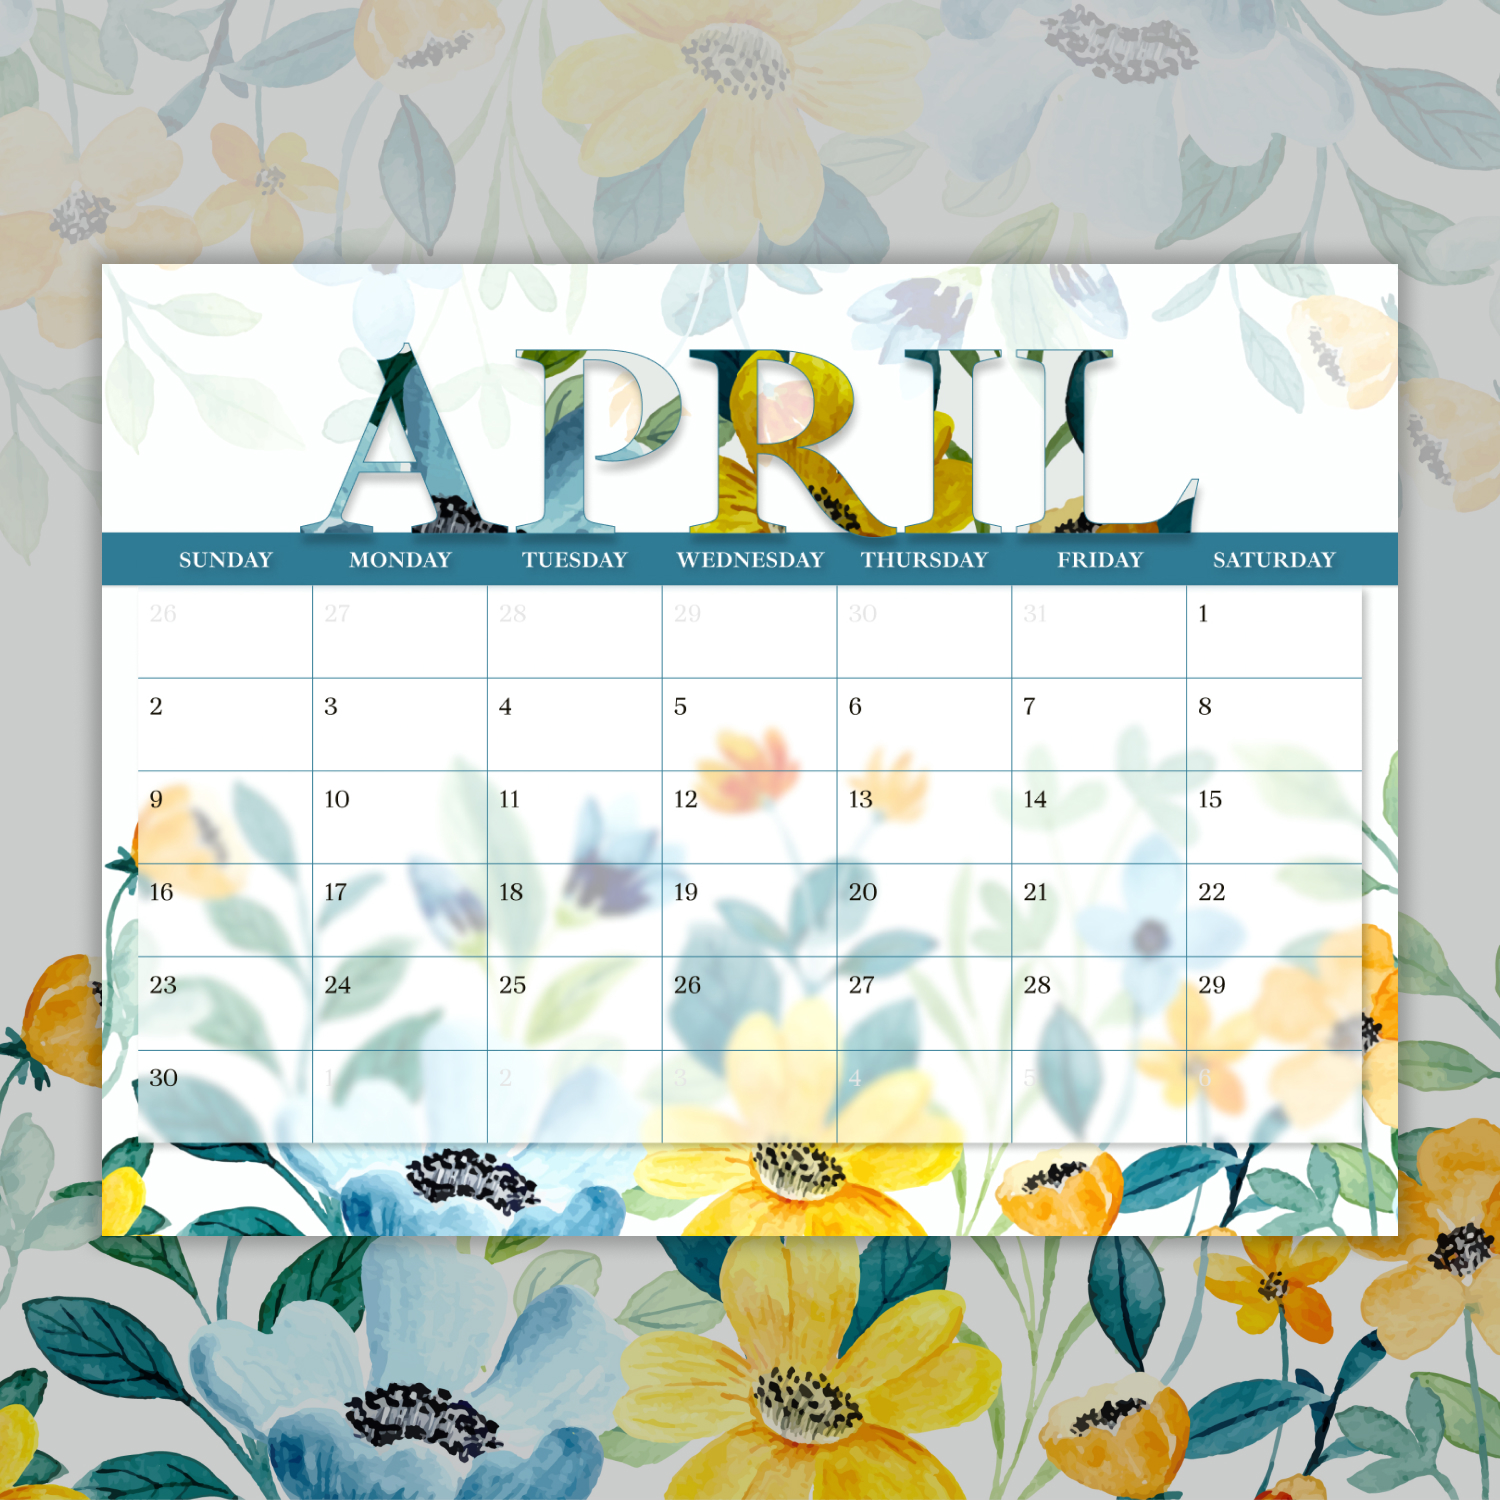 Calendar with a floral design on it.